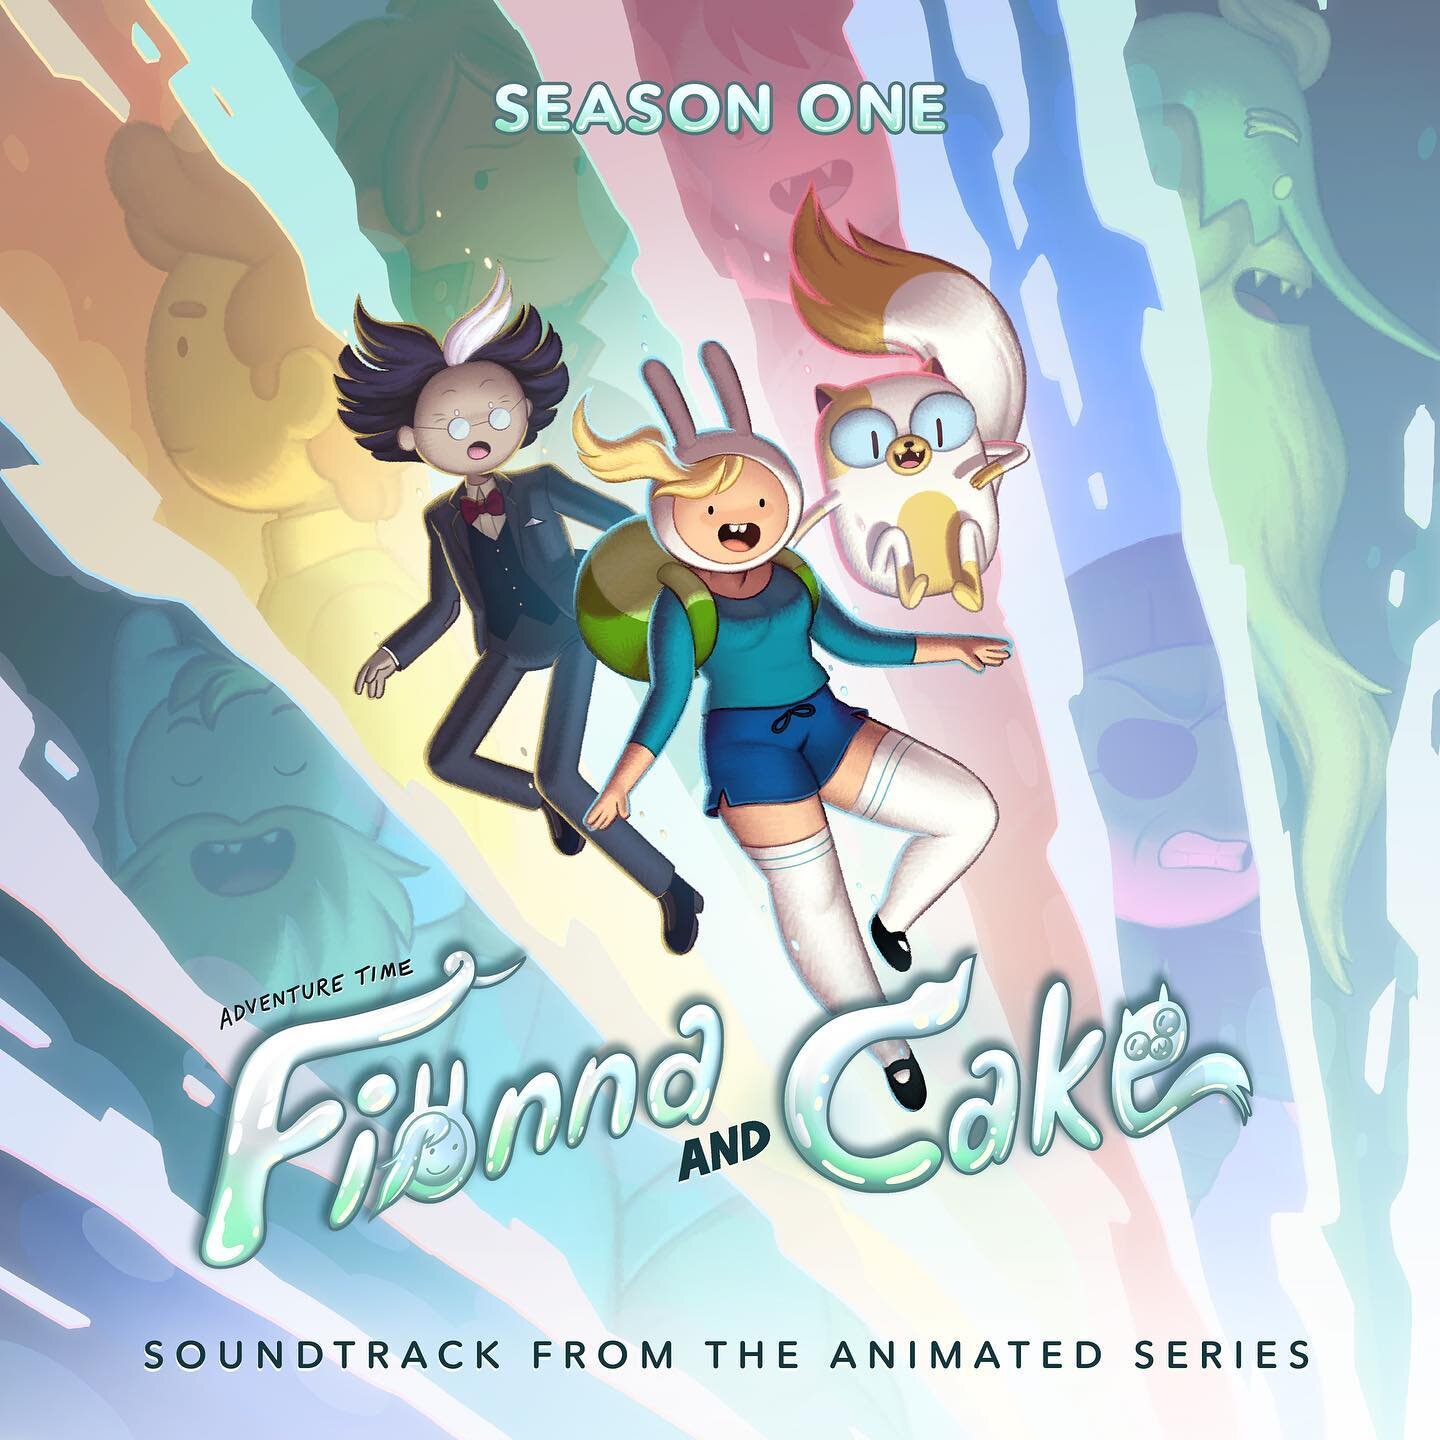 Adventure Time: Fionna and Cake Soundtrack is out now!! ⭐️ 
Available on all your fav streaming platforms! 

#adventuretime #adventuretimefionnaandcake #fionnaandcake